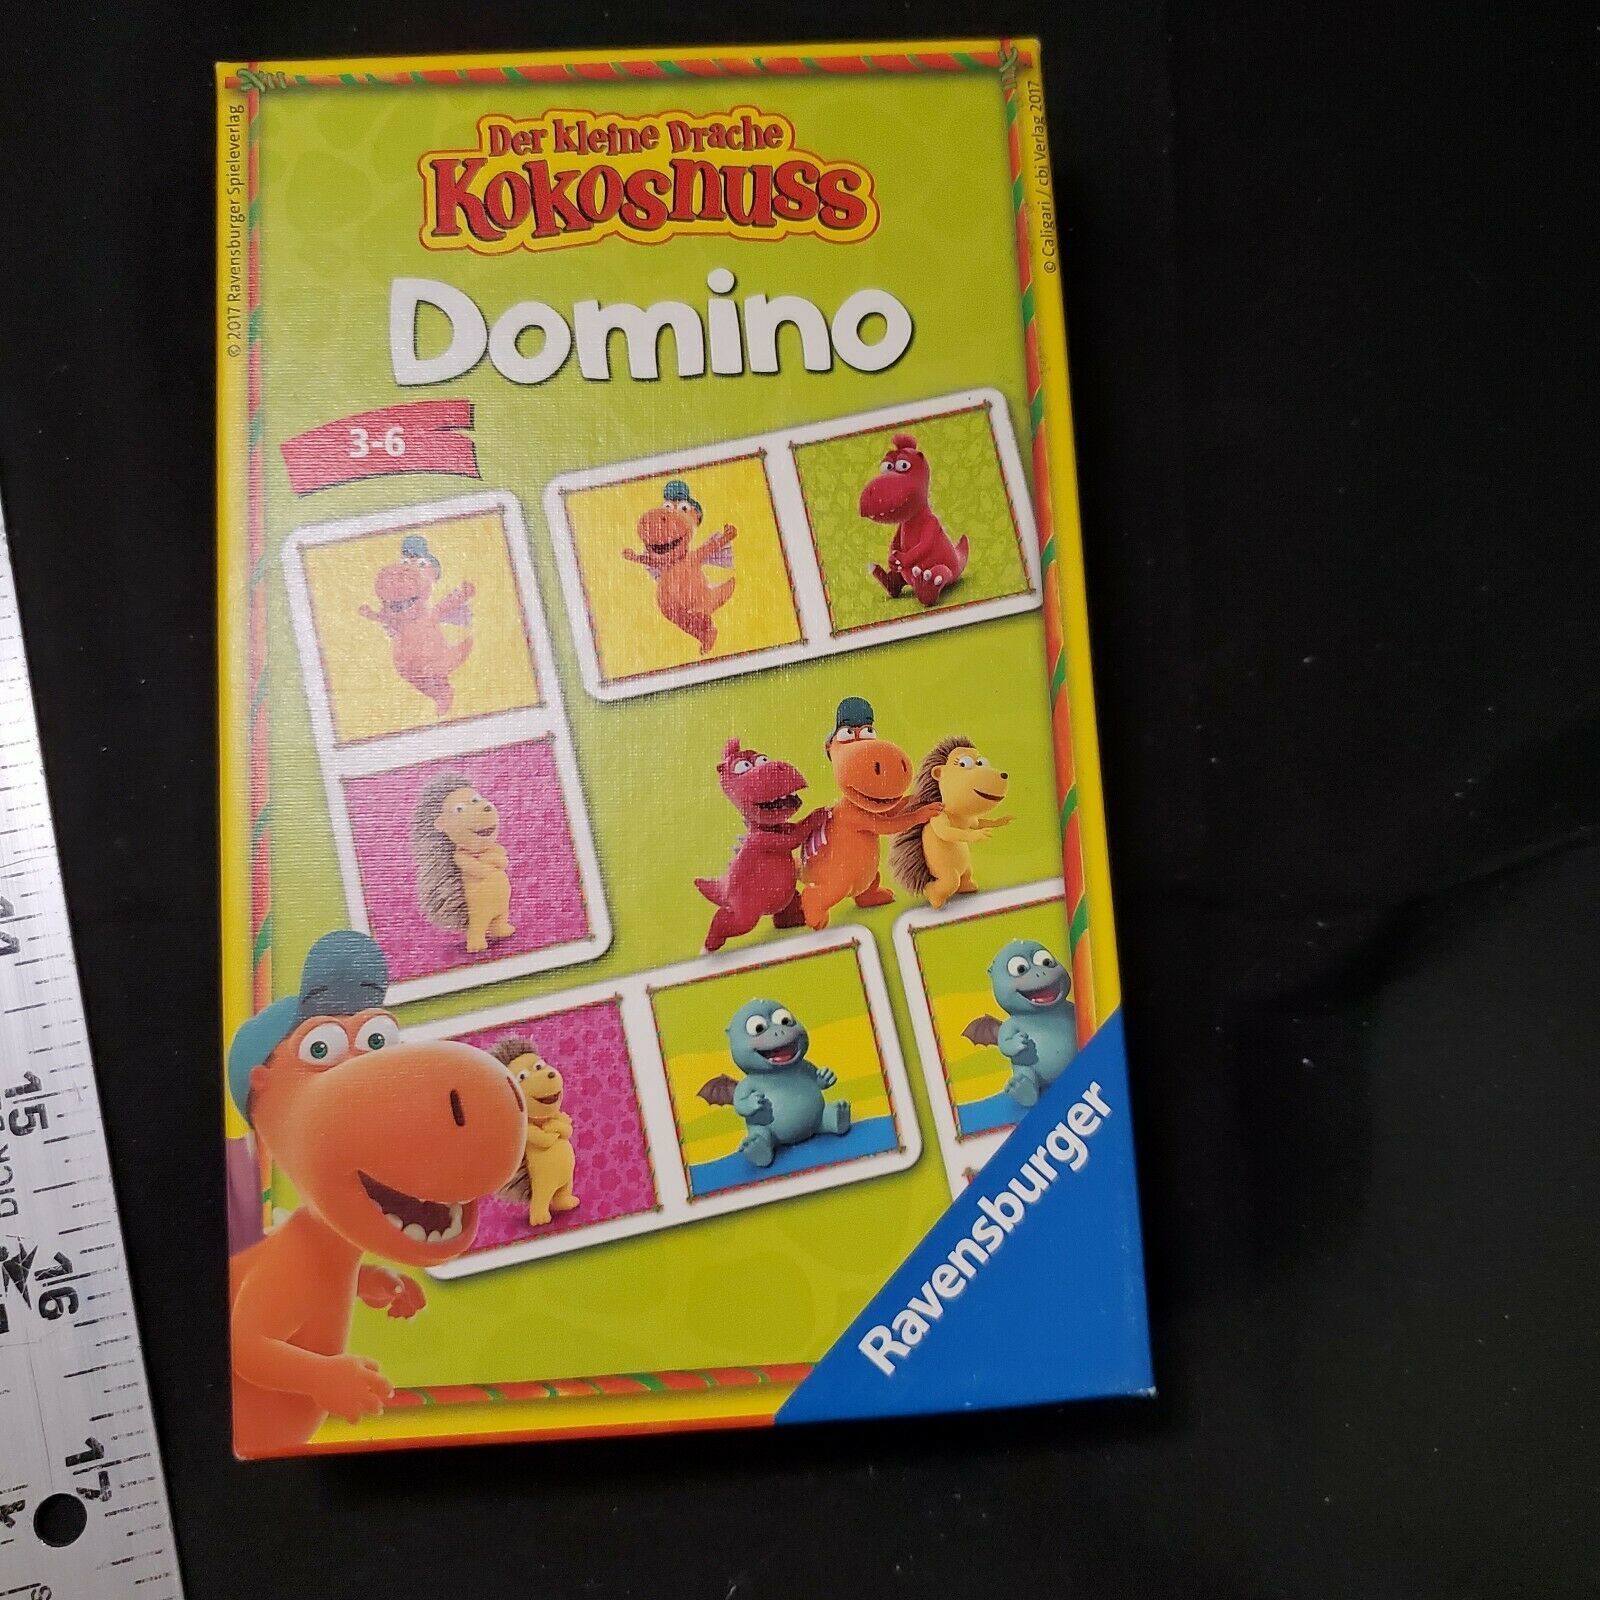 Primary image for Little Dragon Ravensburger Domino Game instruction in German, Italian and French